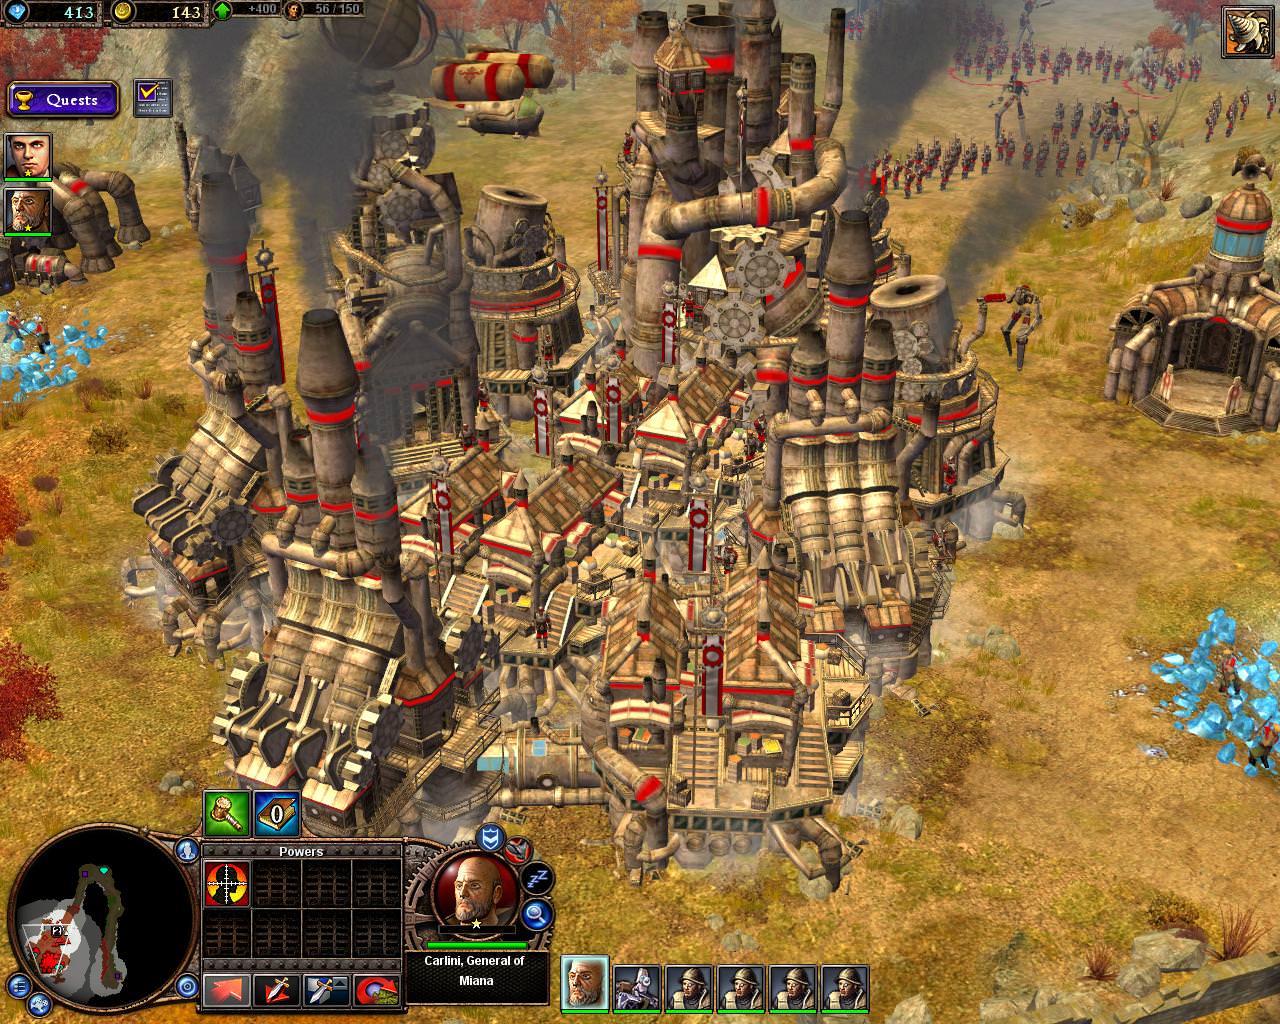 Rise of Nations - Rise of Legends İndir